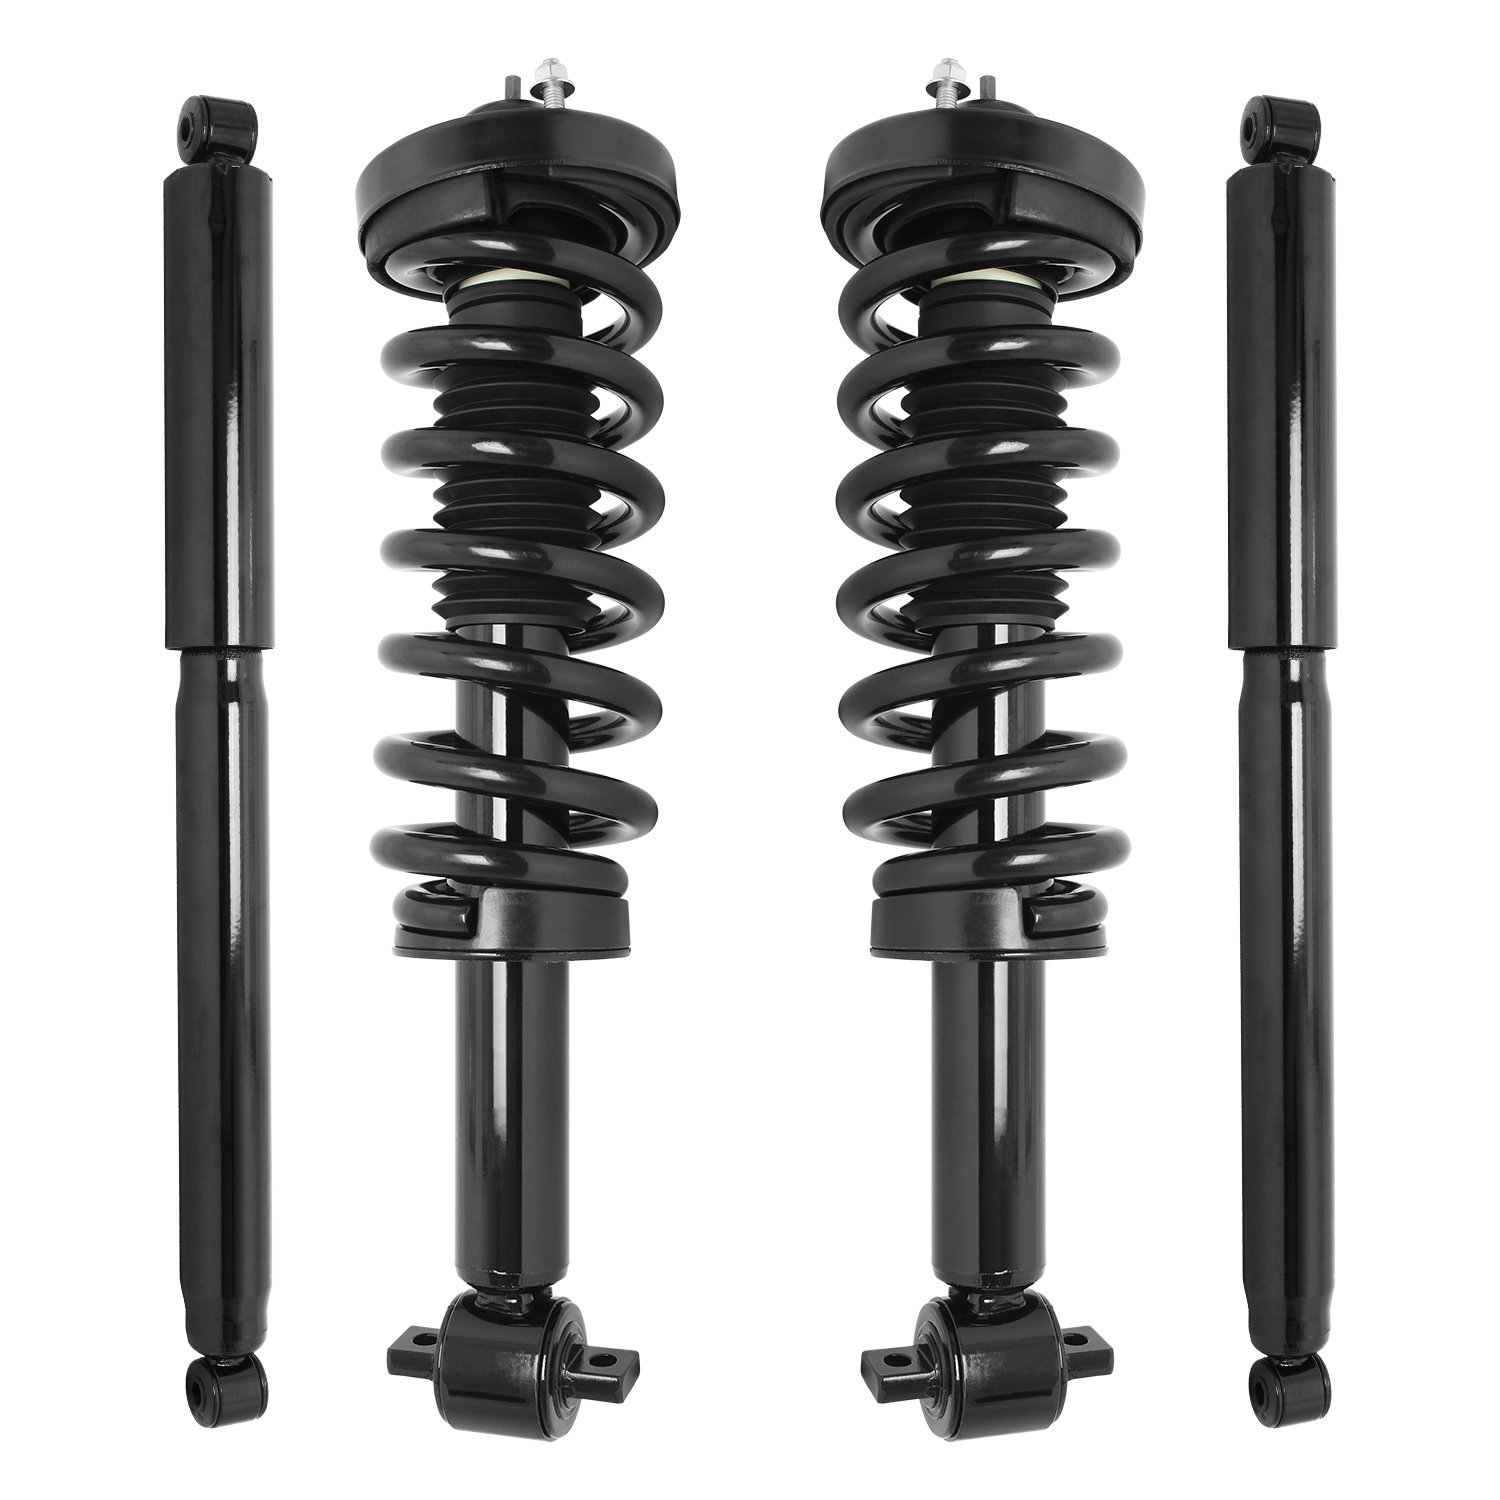 4-11265-252600-001 Front & Rear Suspension Strut & Coil Spring Assembly Fits Select Ford F-150